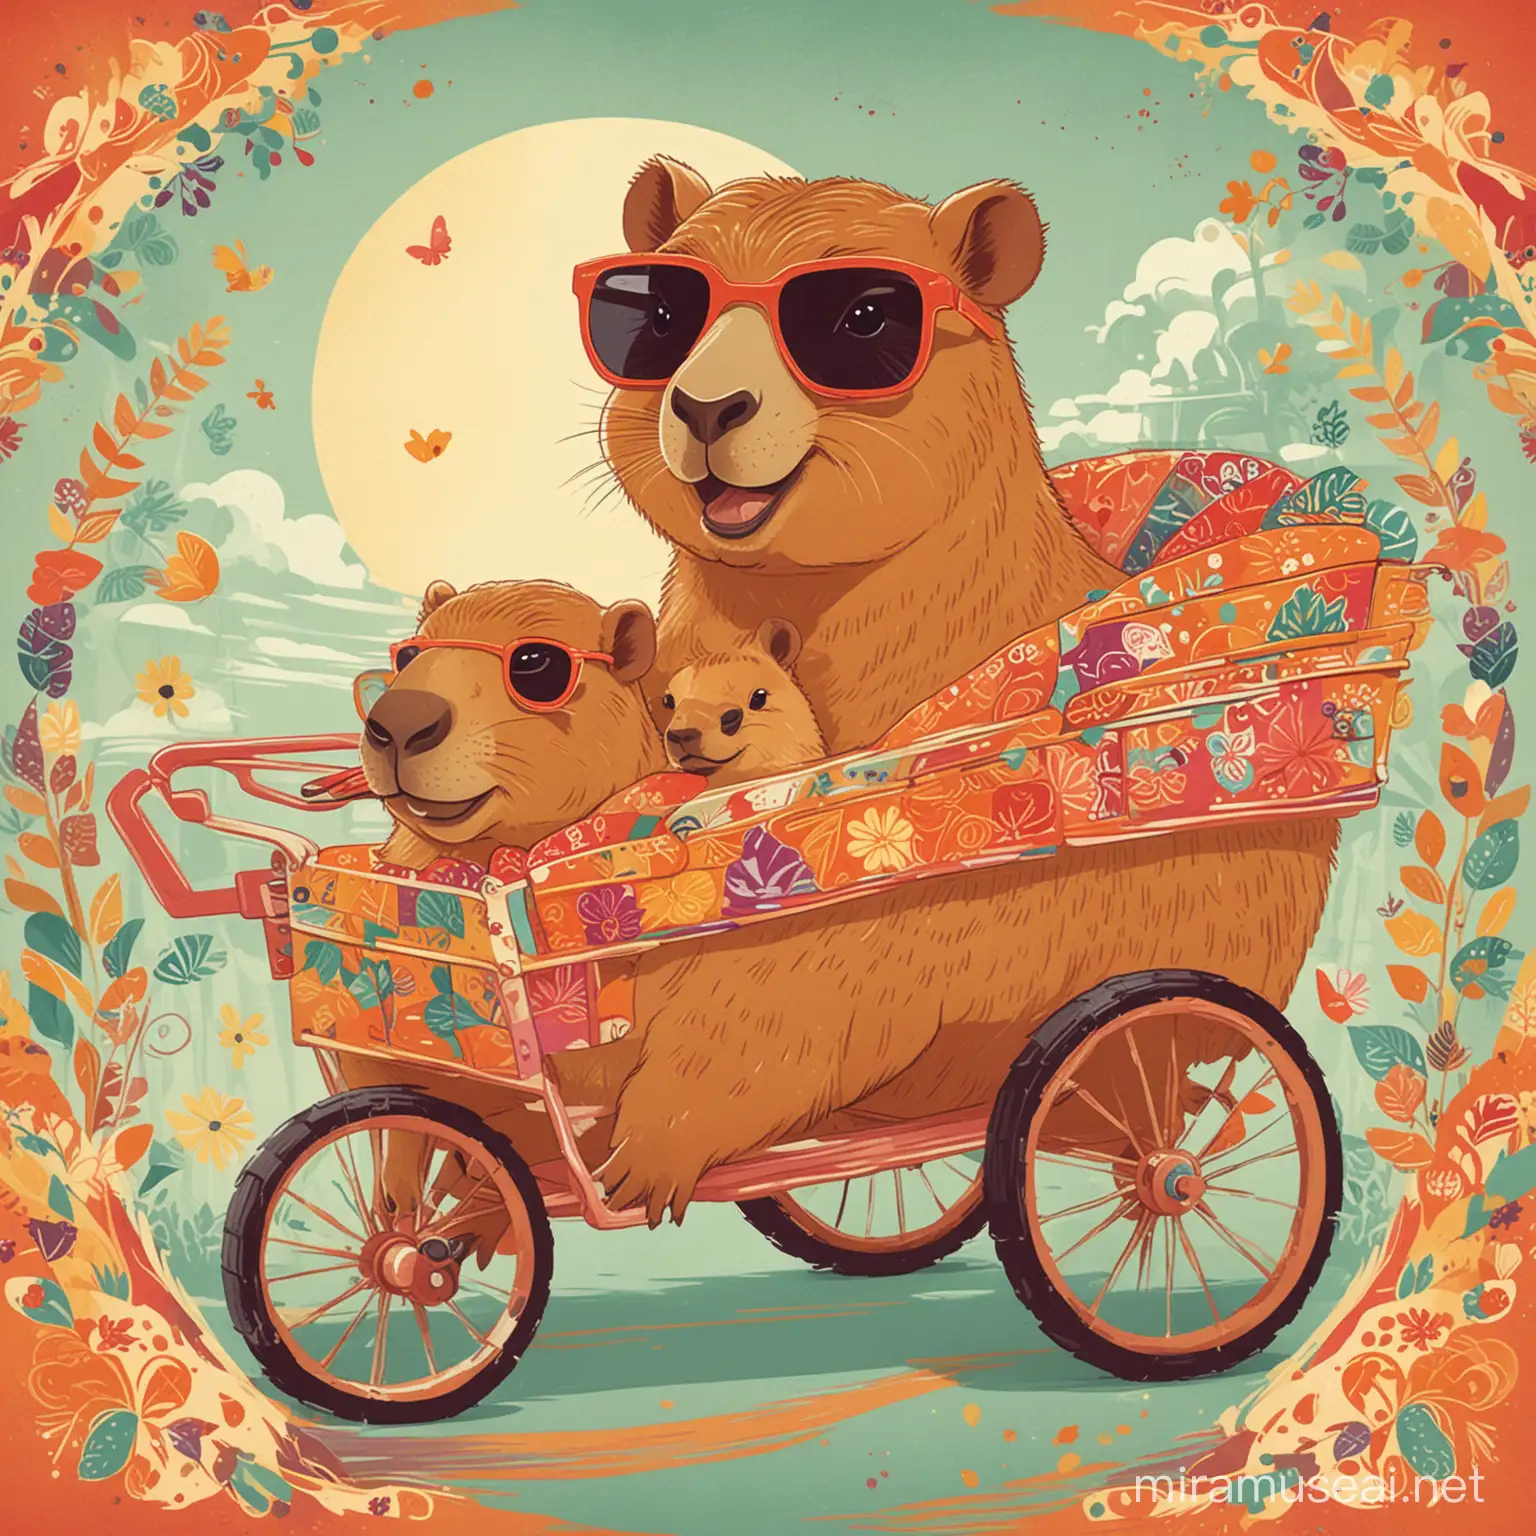 A delightful retro-inspired vector illustration featuring a loving capybara mommy and her adorable baby. They are both portrayed with a groovy vibe, wearing sunglasses and smiling. The mommy capybara pushes a quirky, colorful cart with the baby sitting inside. The background is a vibrant, patterned design with a sense of nostalgia and fun.